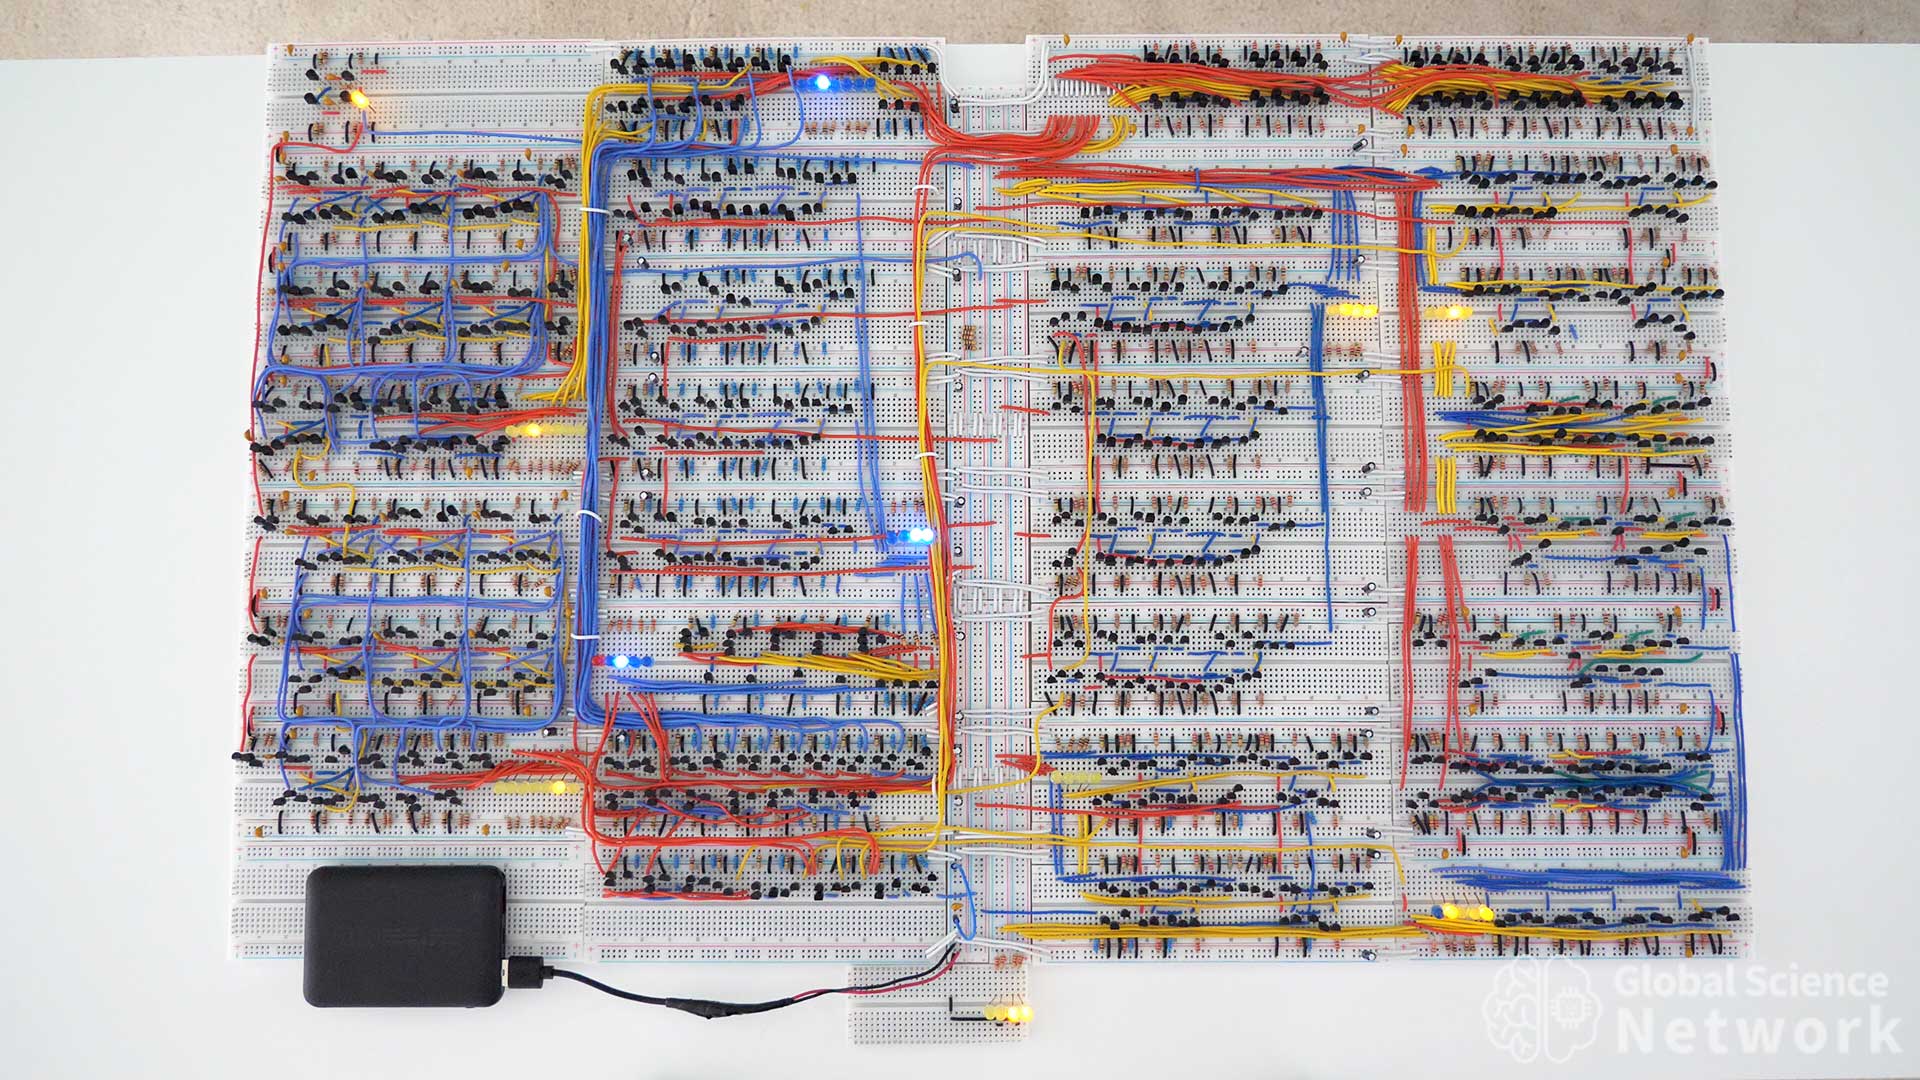 4-bit computer built with individual transistors on breadboards